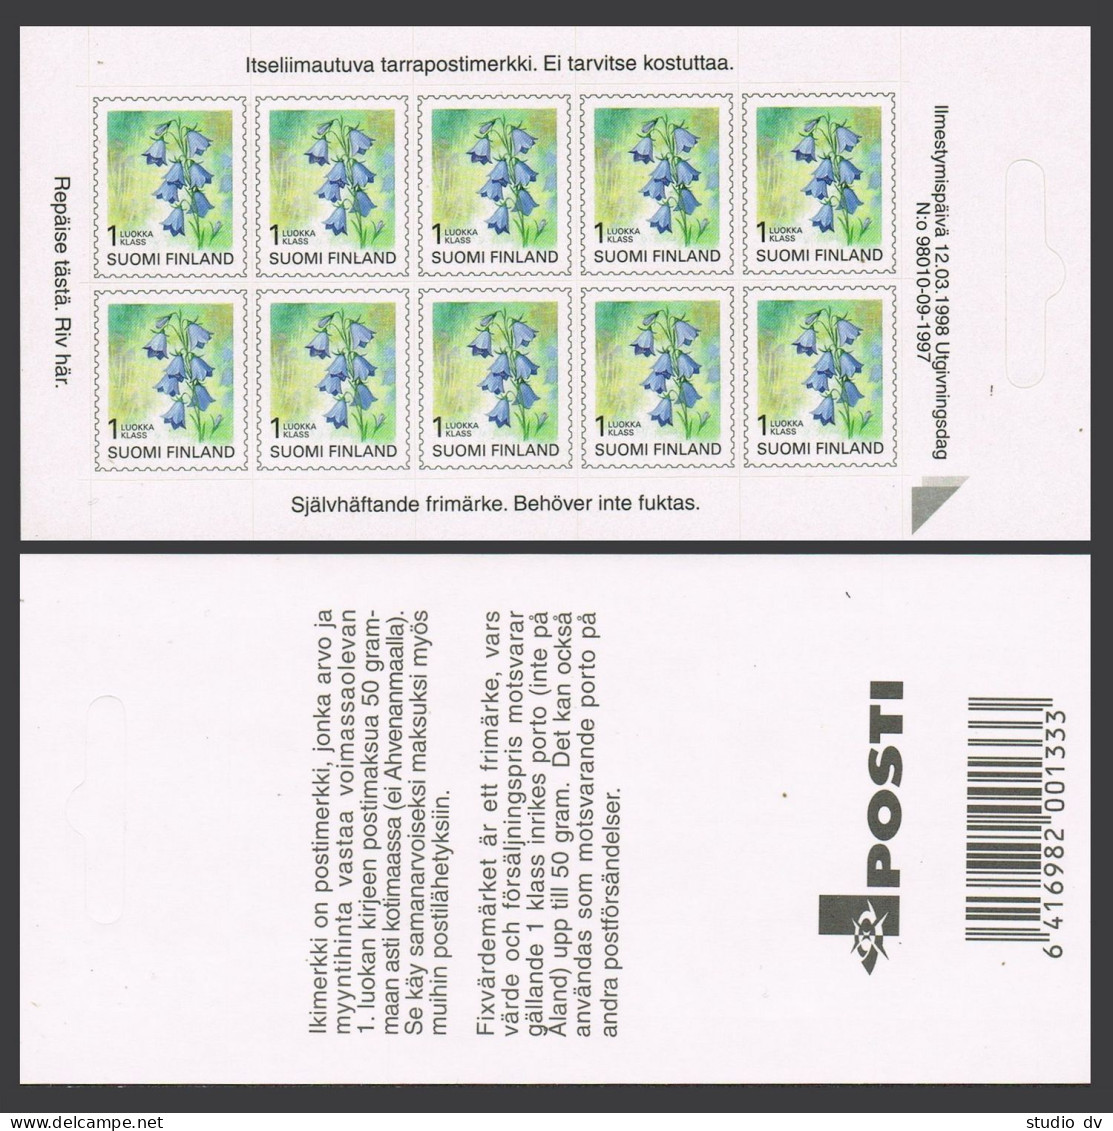 Finland 844 Sheet/10 Self-adhesive Stamps,MNH.Michel 1430 Fb. Harebell,1998. - Neufs